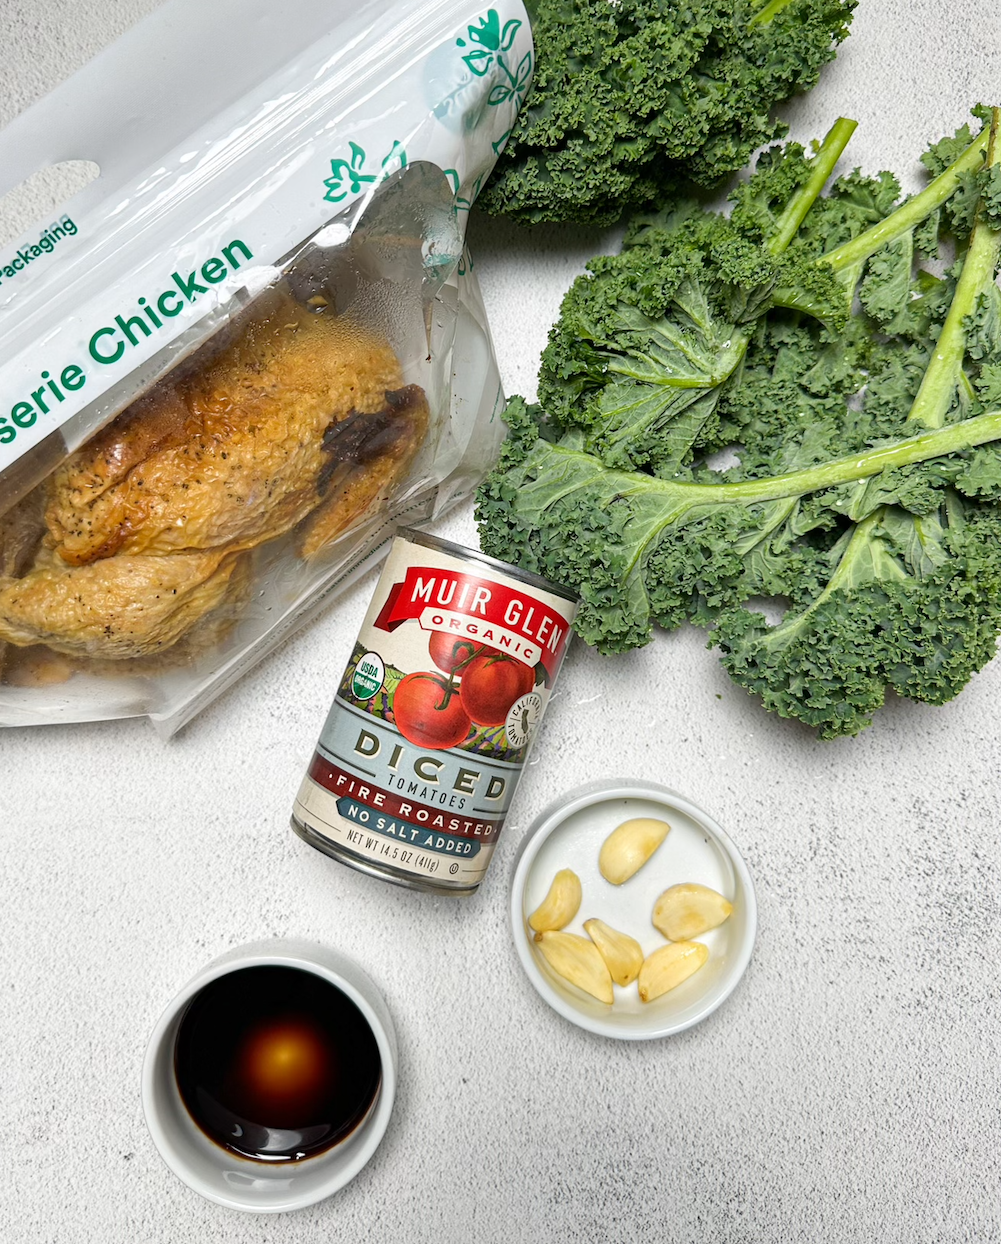 Ingredients: rotisserie chicken, a can of diced tomatoes, garlic cloves, fresh kale, and balsamic vinegar